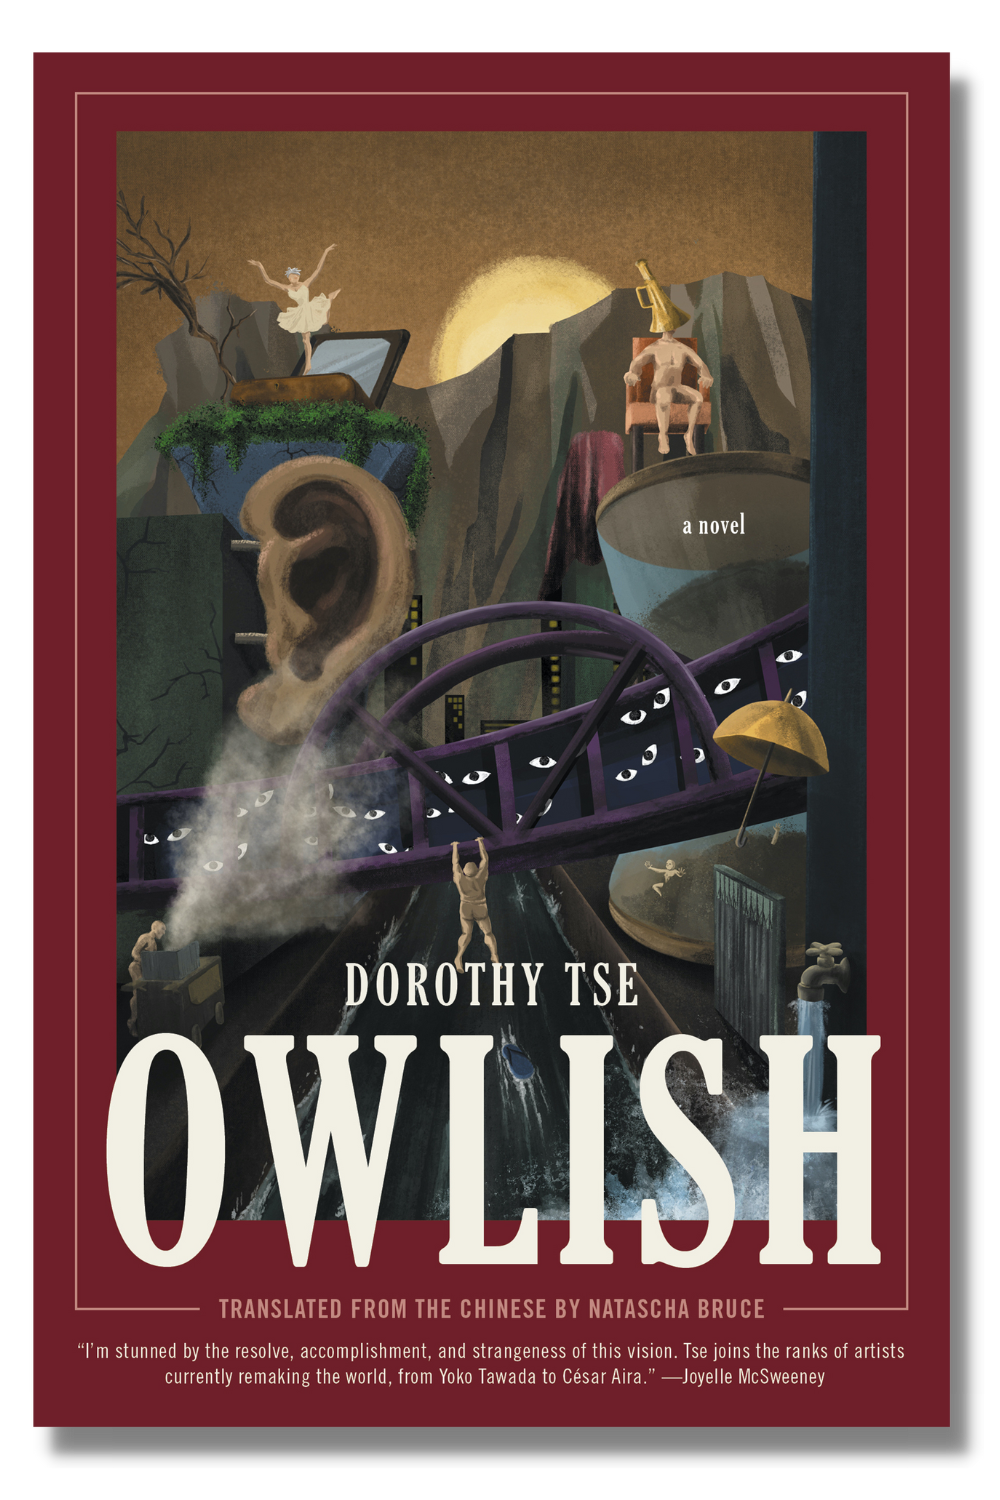 The cover of "Owlish"